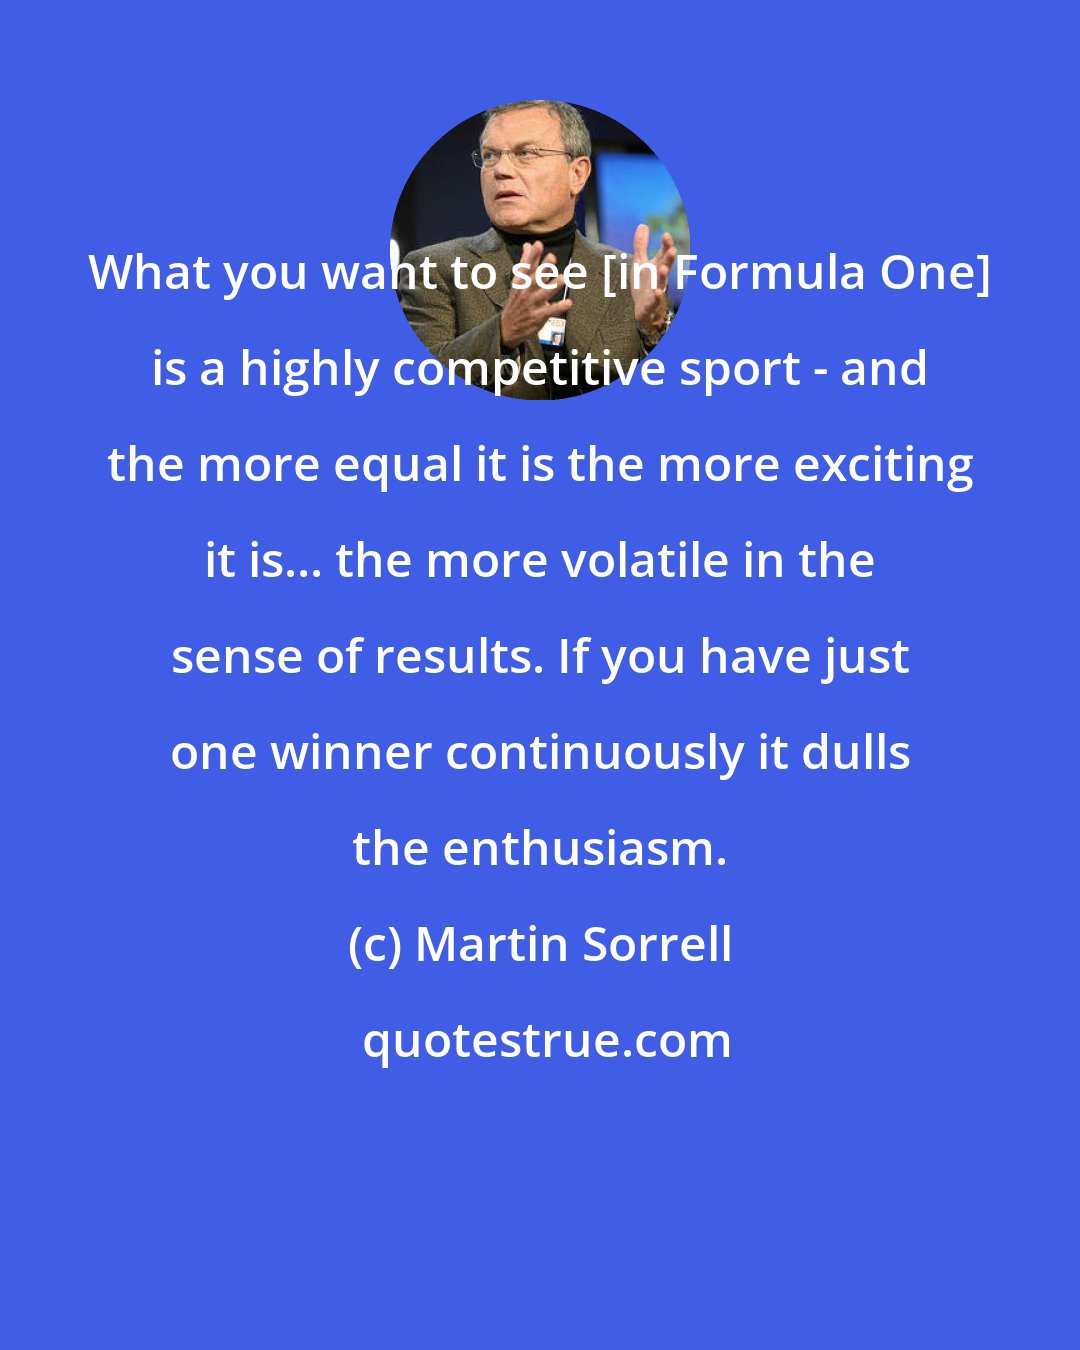 Martin Sorrell: What you want to see [in Formula One] is a highly competitive sport - and the more equal it is the more exciting it is... the more volatile in the sense of results. If you have just one winner continuously it dulls the enthusiasm.